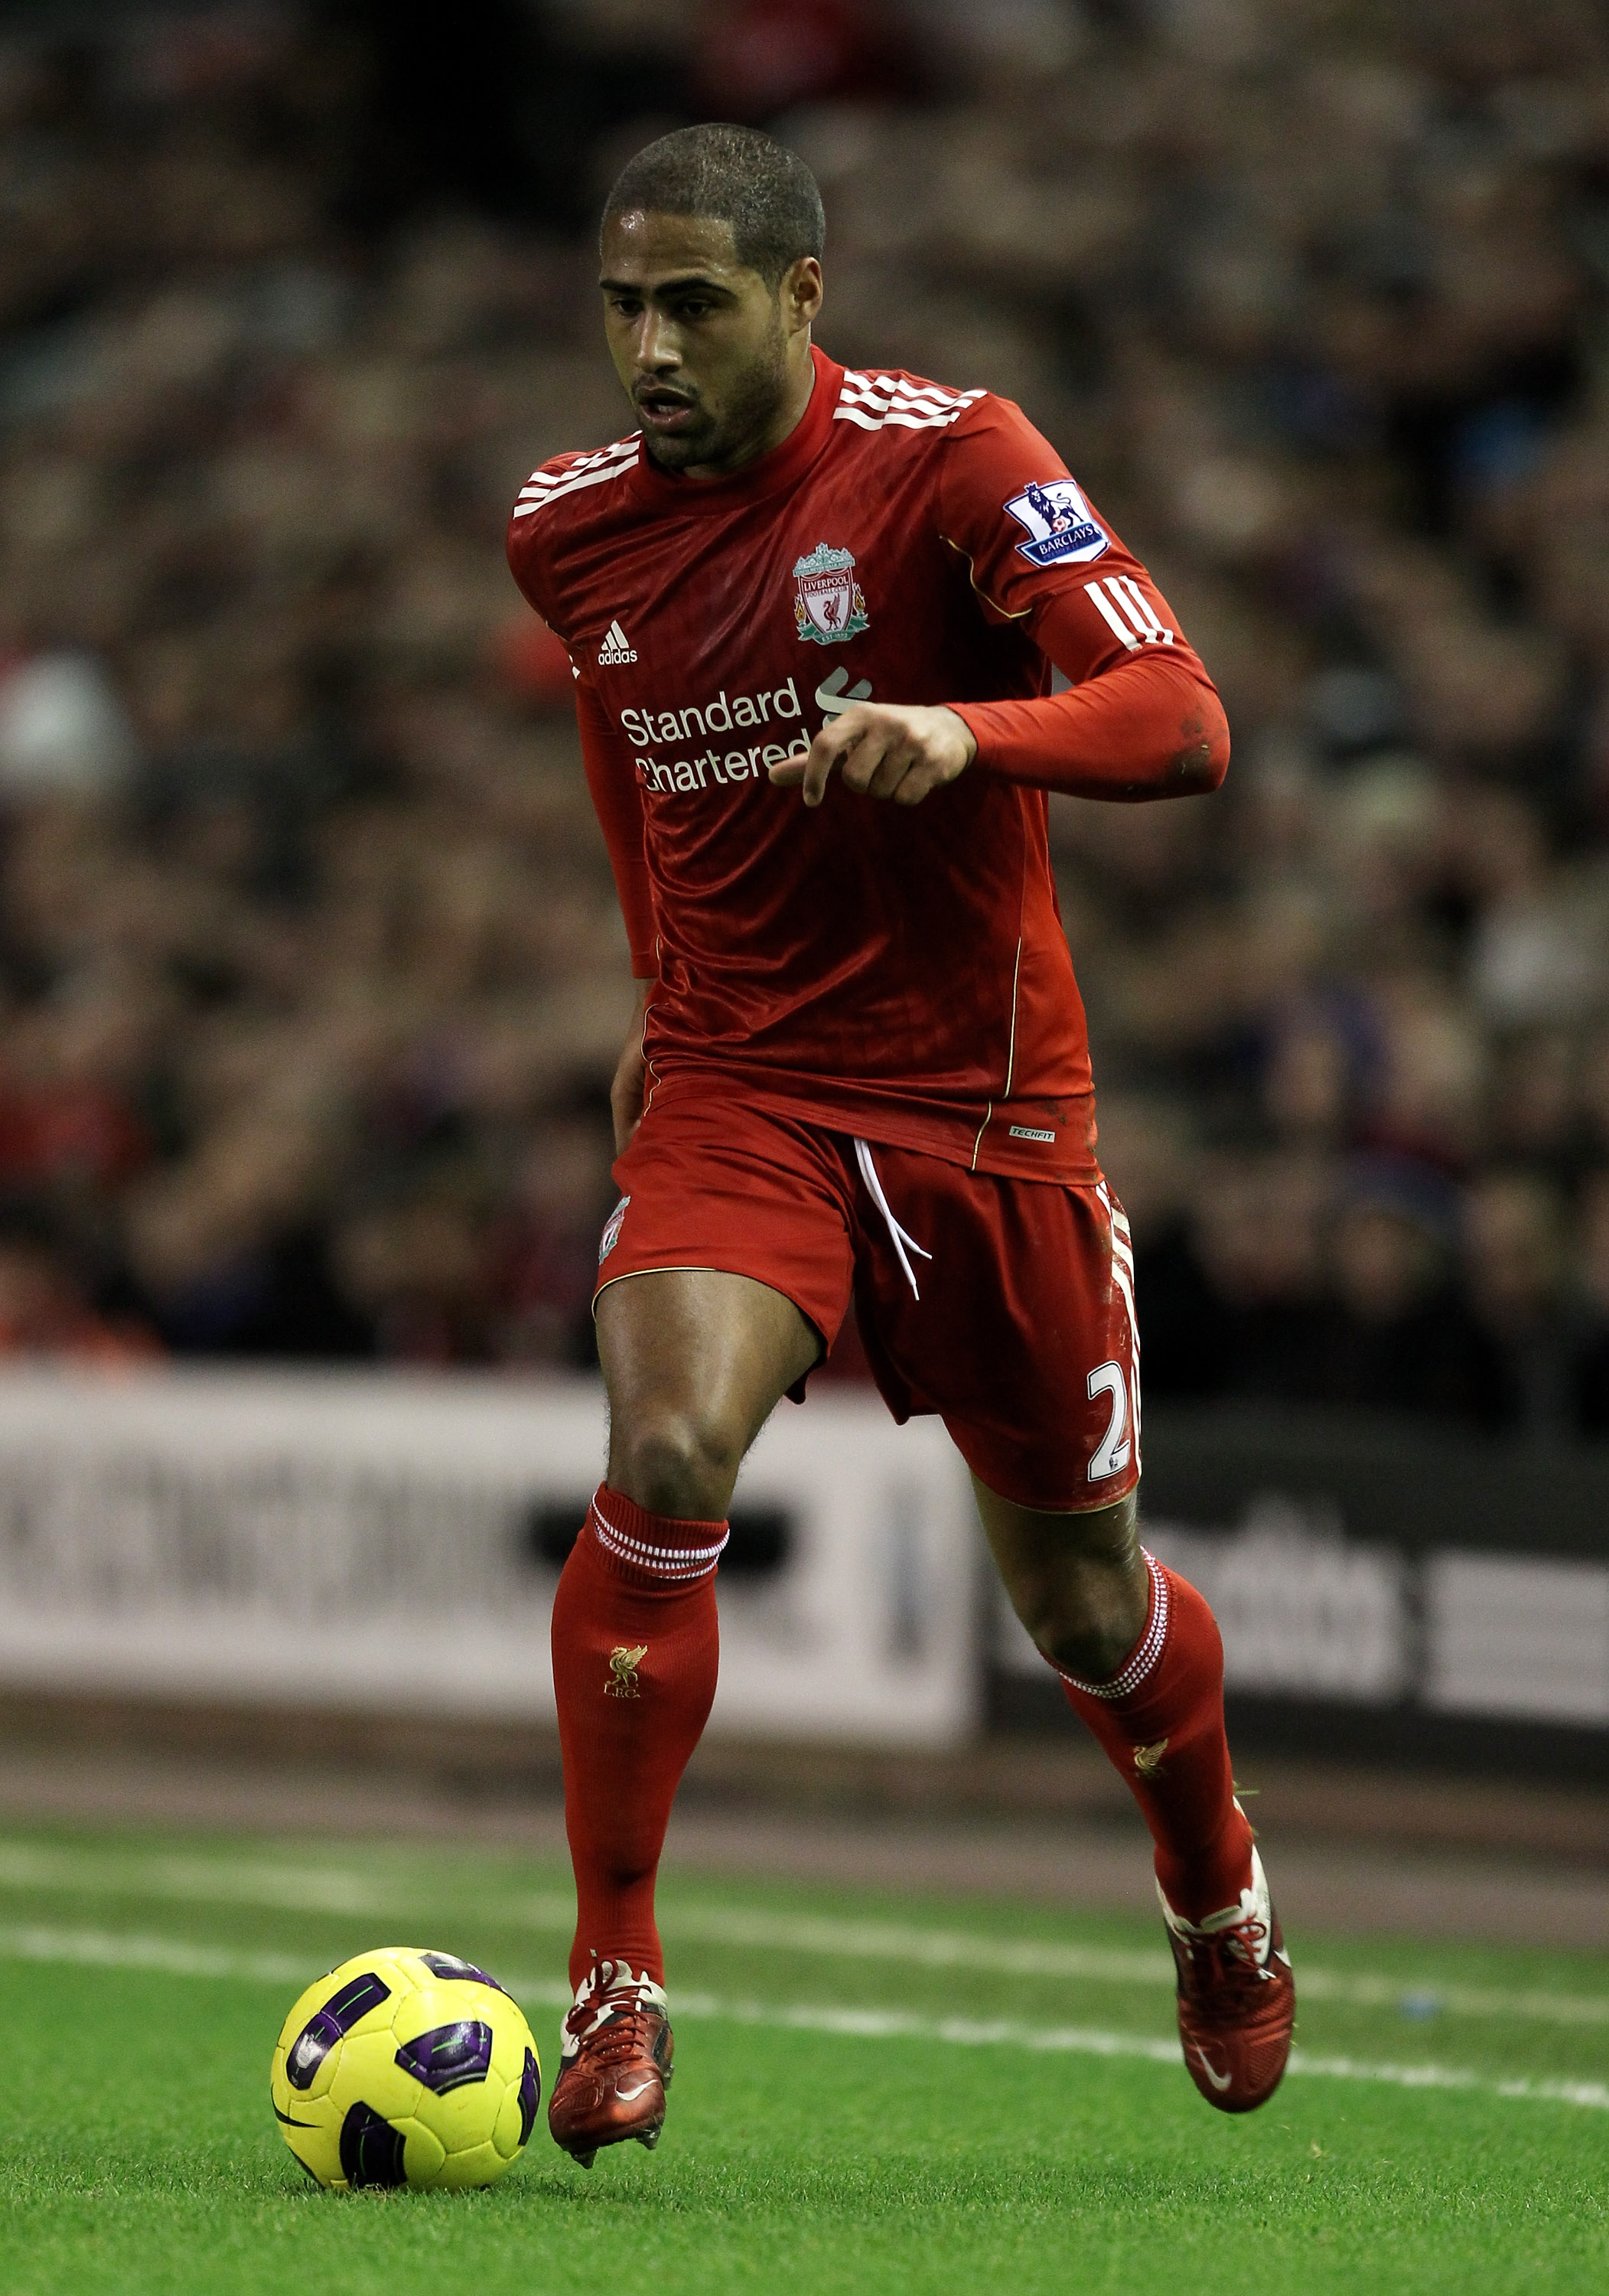 LIVERPOOL, ENGLAND - JANUARY 26:  Glen Johnson of Liverpool in action during the Barclays Premier League match between Liverpool and Fulham at Anfield on January 26, 2011 in Liverpool, England. (Photo by Alex Livesey/Getty Images)